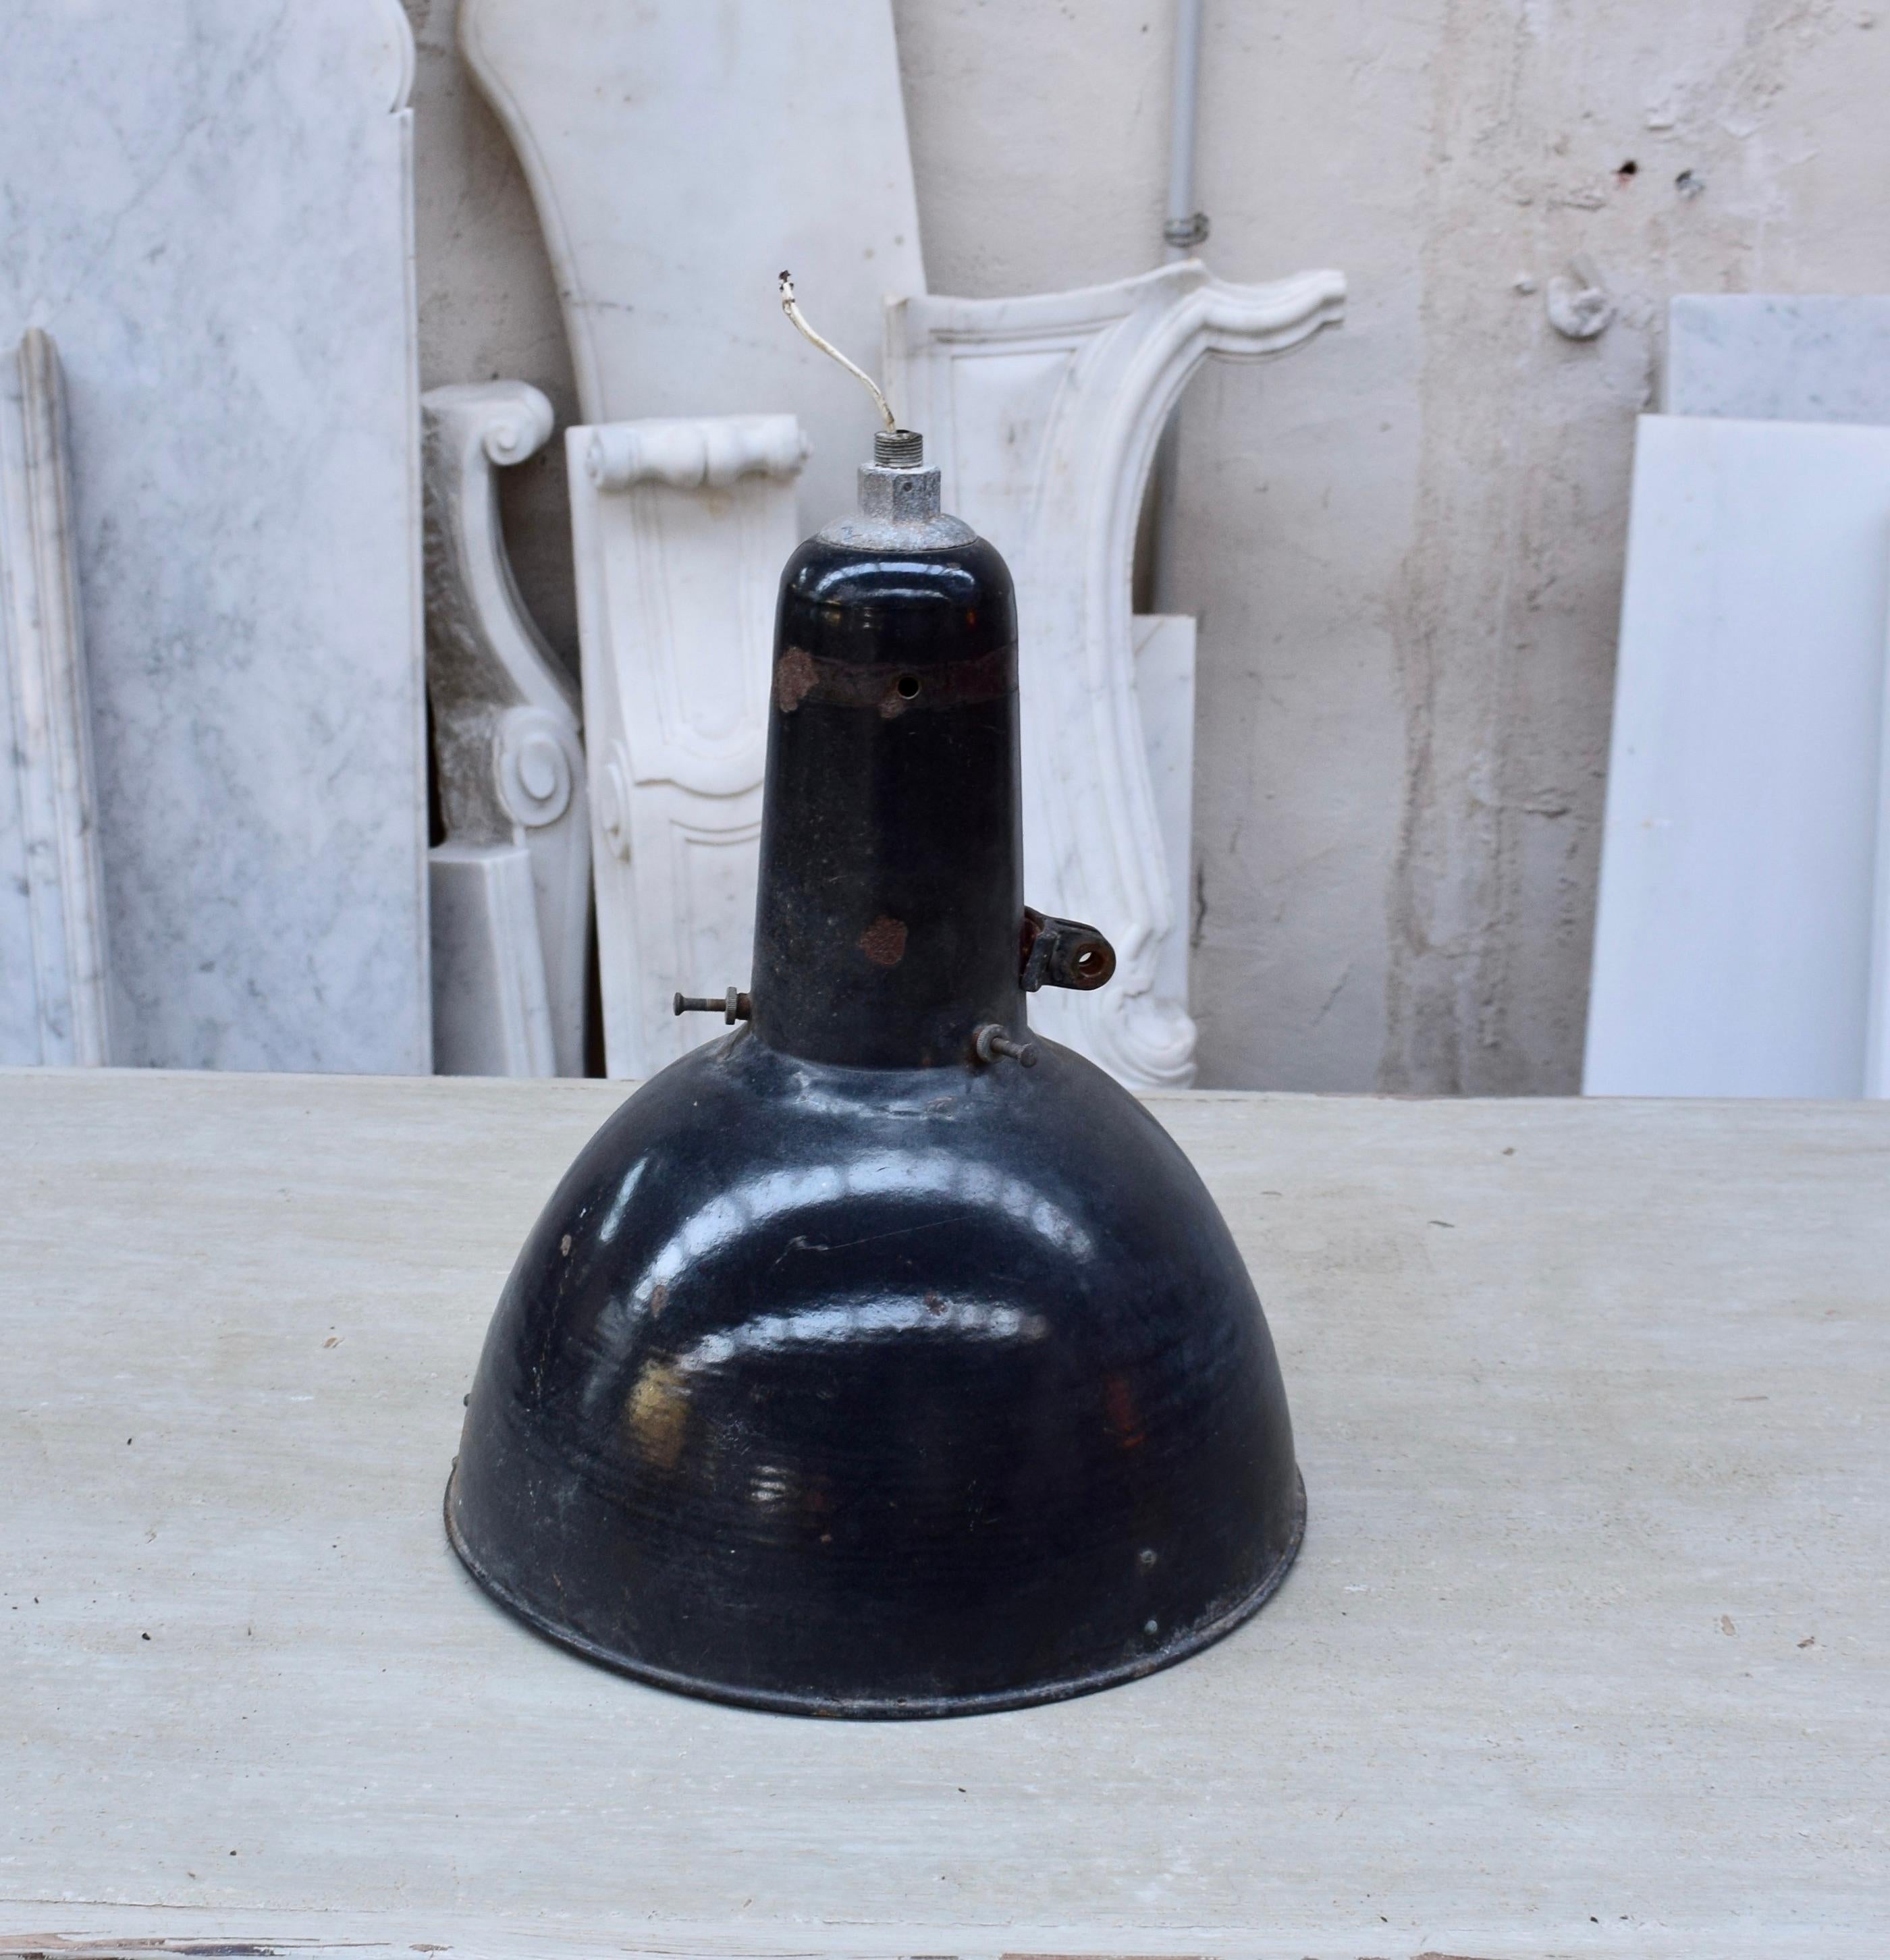 A pendant lamp made in Spain during the 1930s. This light would have previously been used in factories. It is made from enamelled metal, they are in their original condition with signs of age and usage. Each lamp has a black exterior and a white